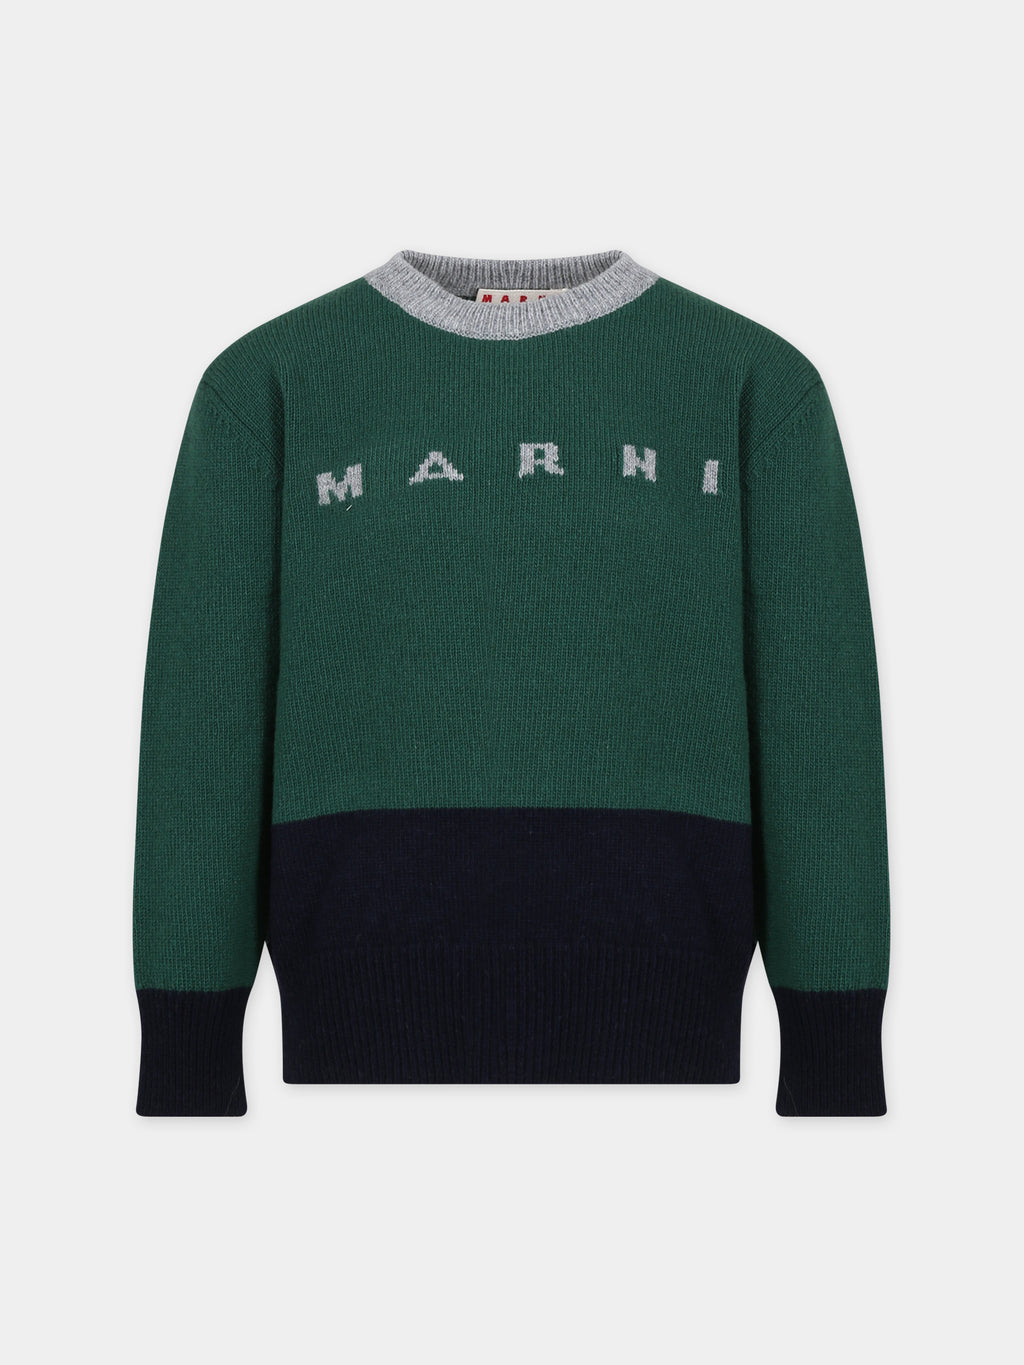 Green sweater for kids with logo